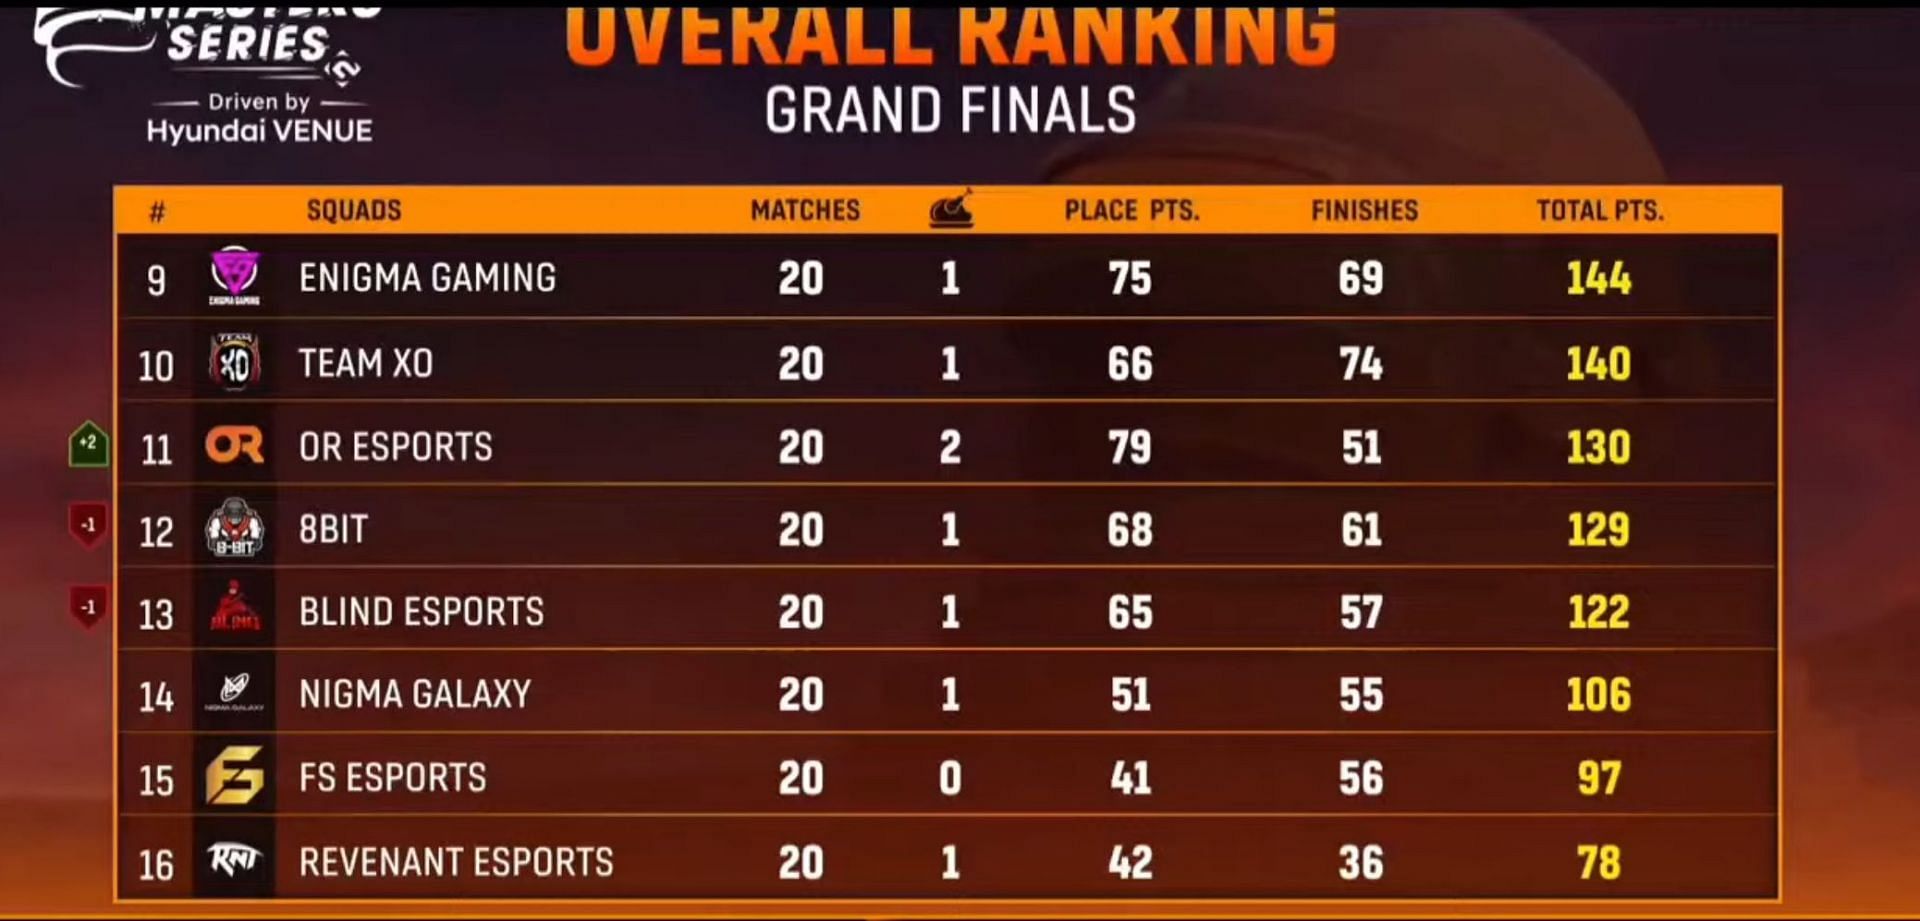 OR Esports finished 11th in the Grand Finals (Image via loco)